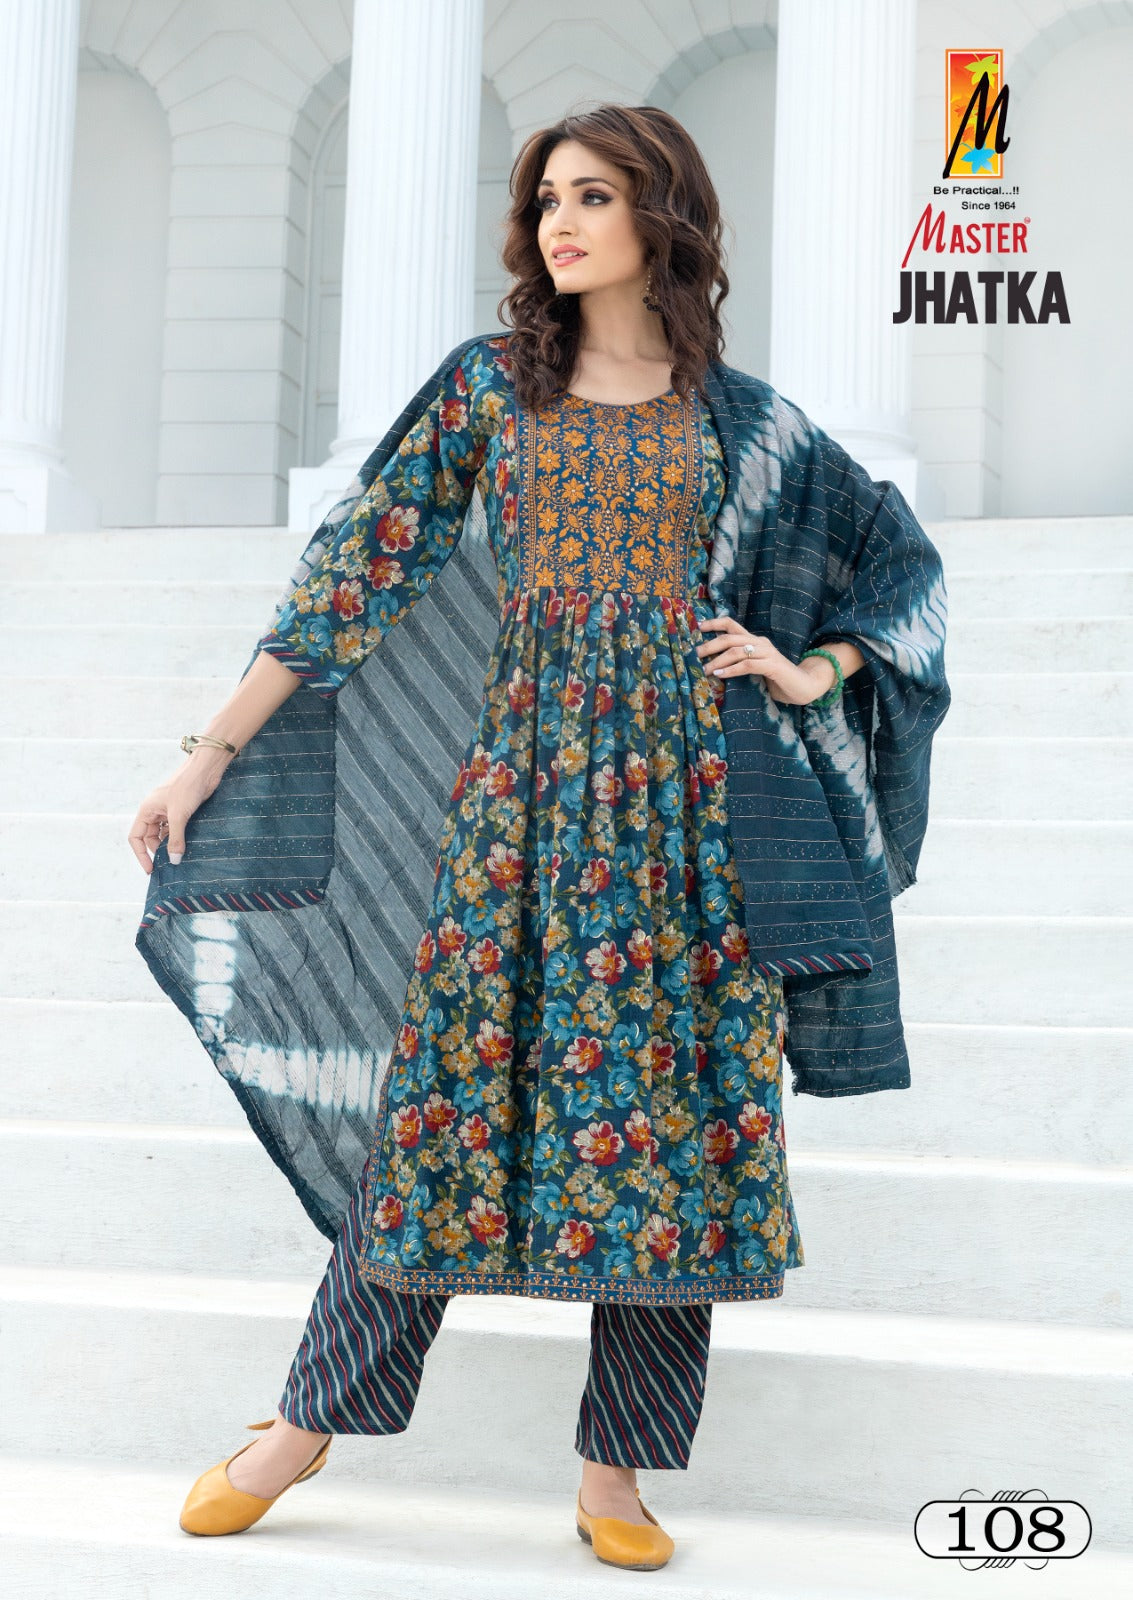 Jhatka Master Capsule Readymade Pant Style Suits